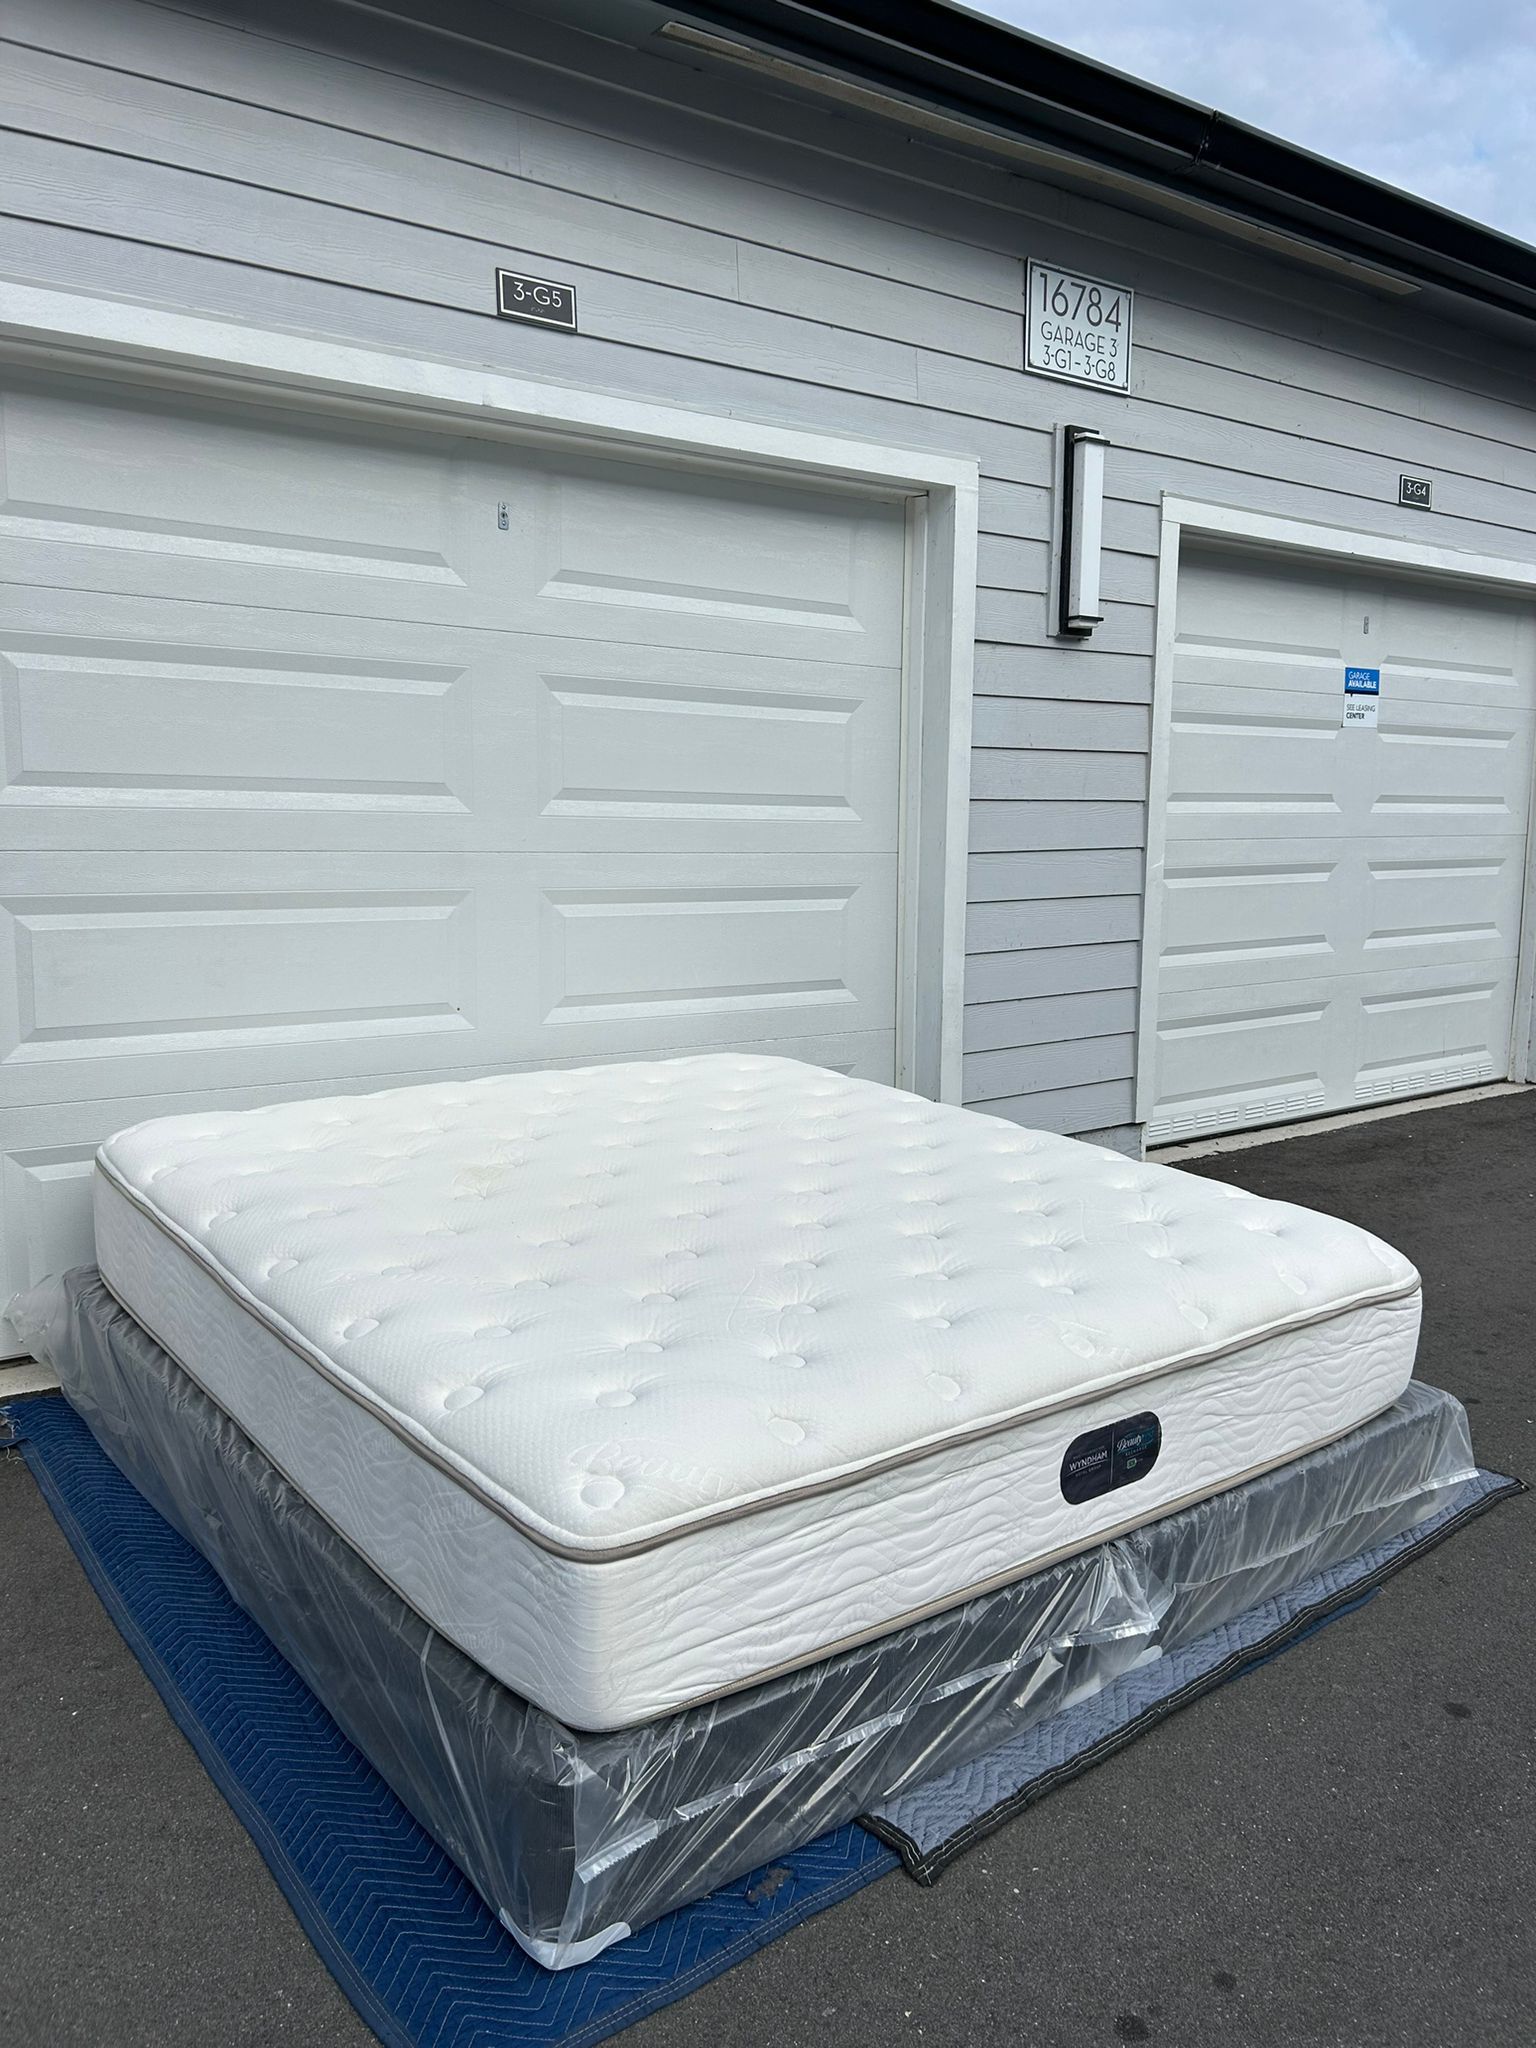 King Mattress BEAUTY REST Recharge with Box Springs Great Condition - Delivery Negotiable